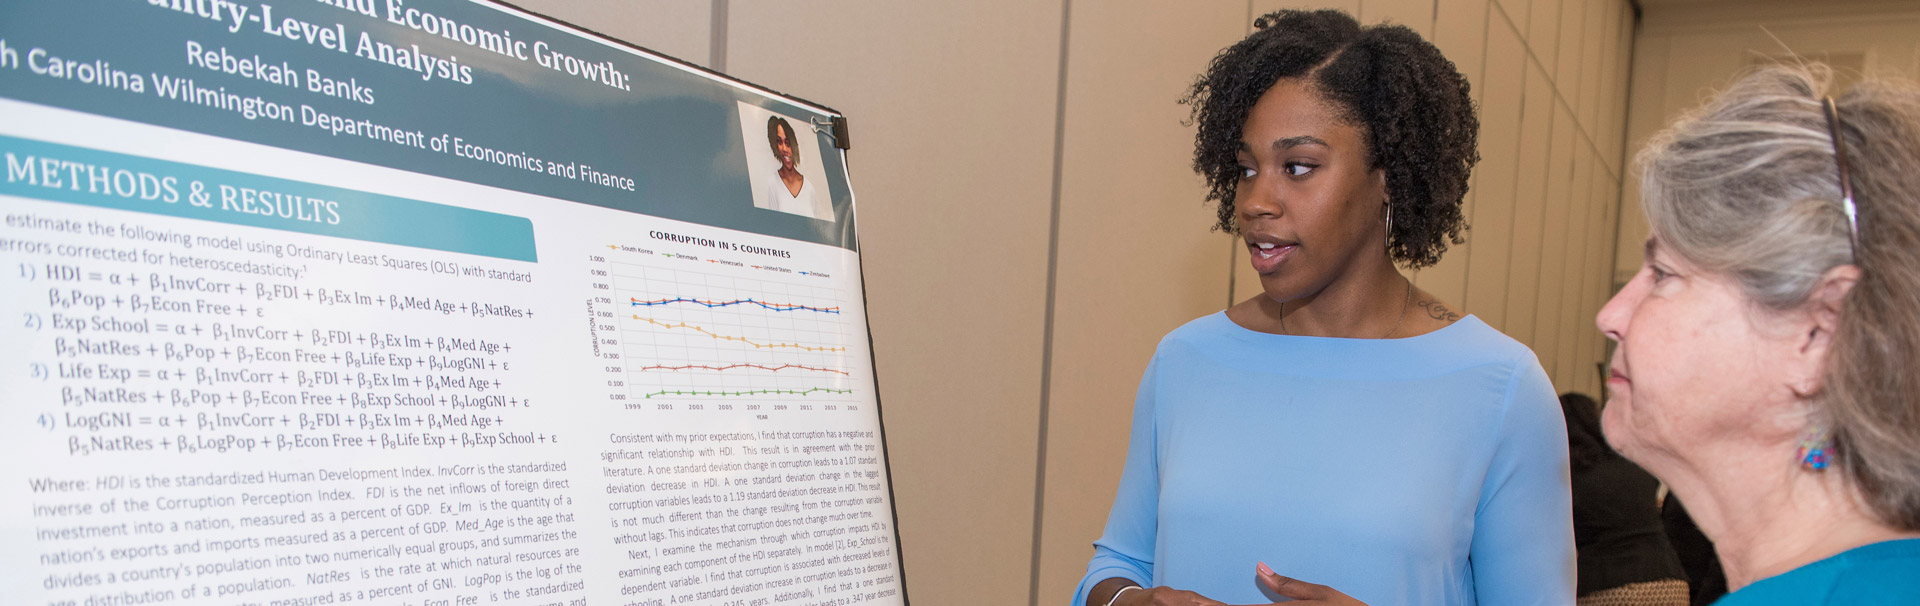 A student standing explains her economic growth research to an onlooker at a poster presentation.